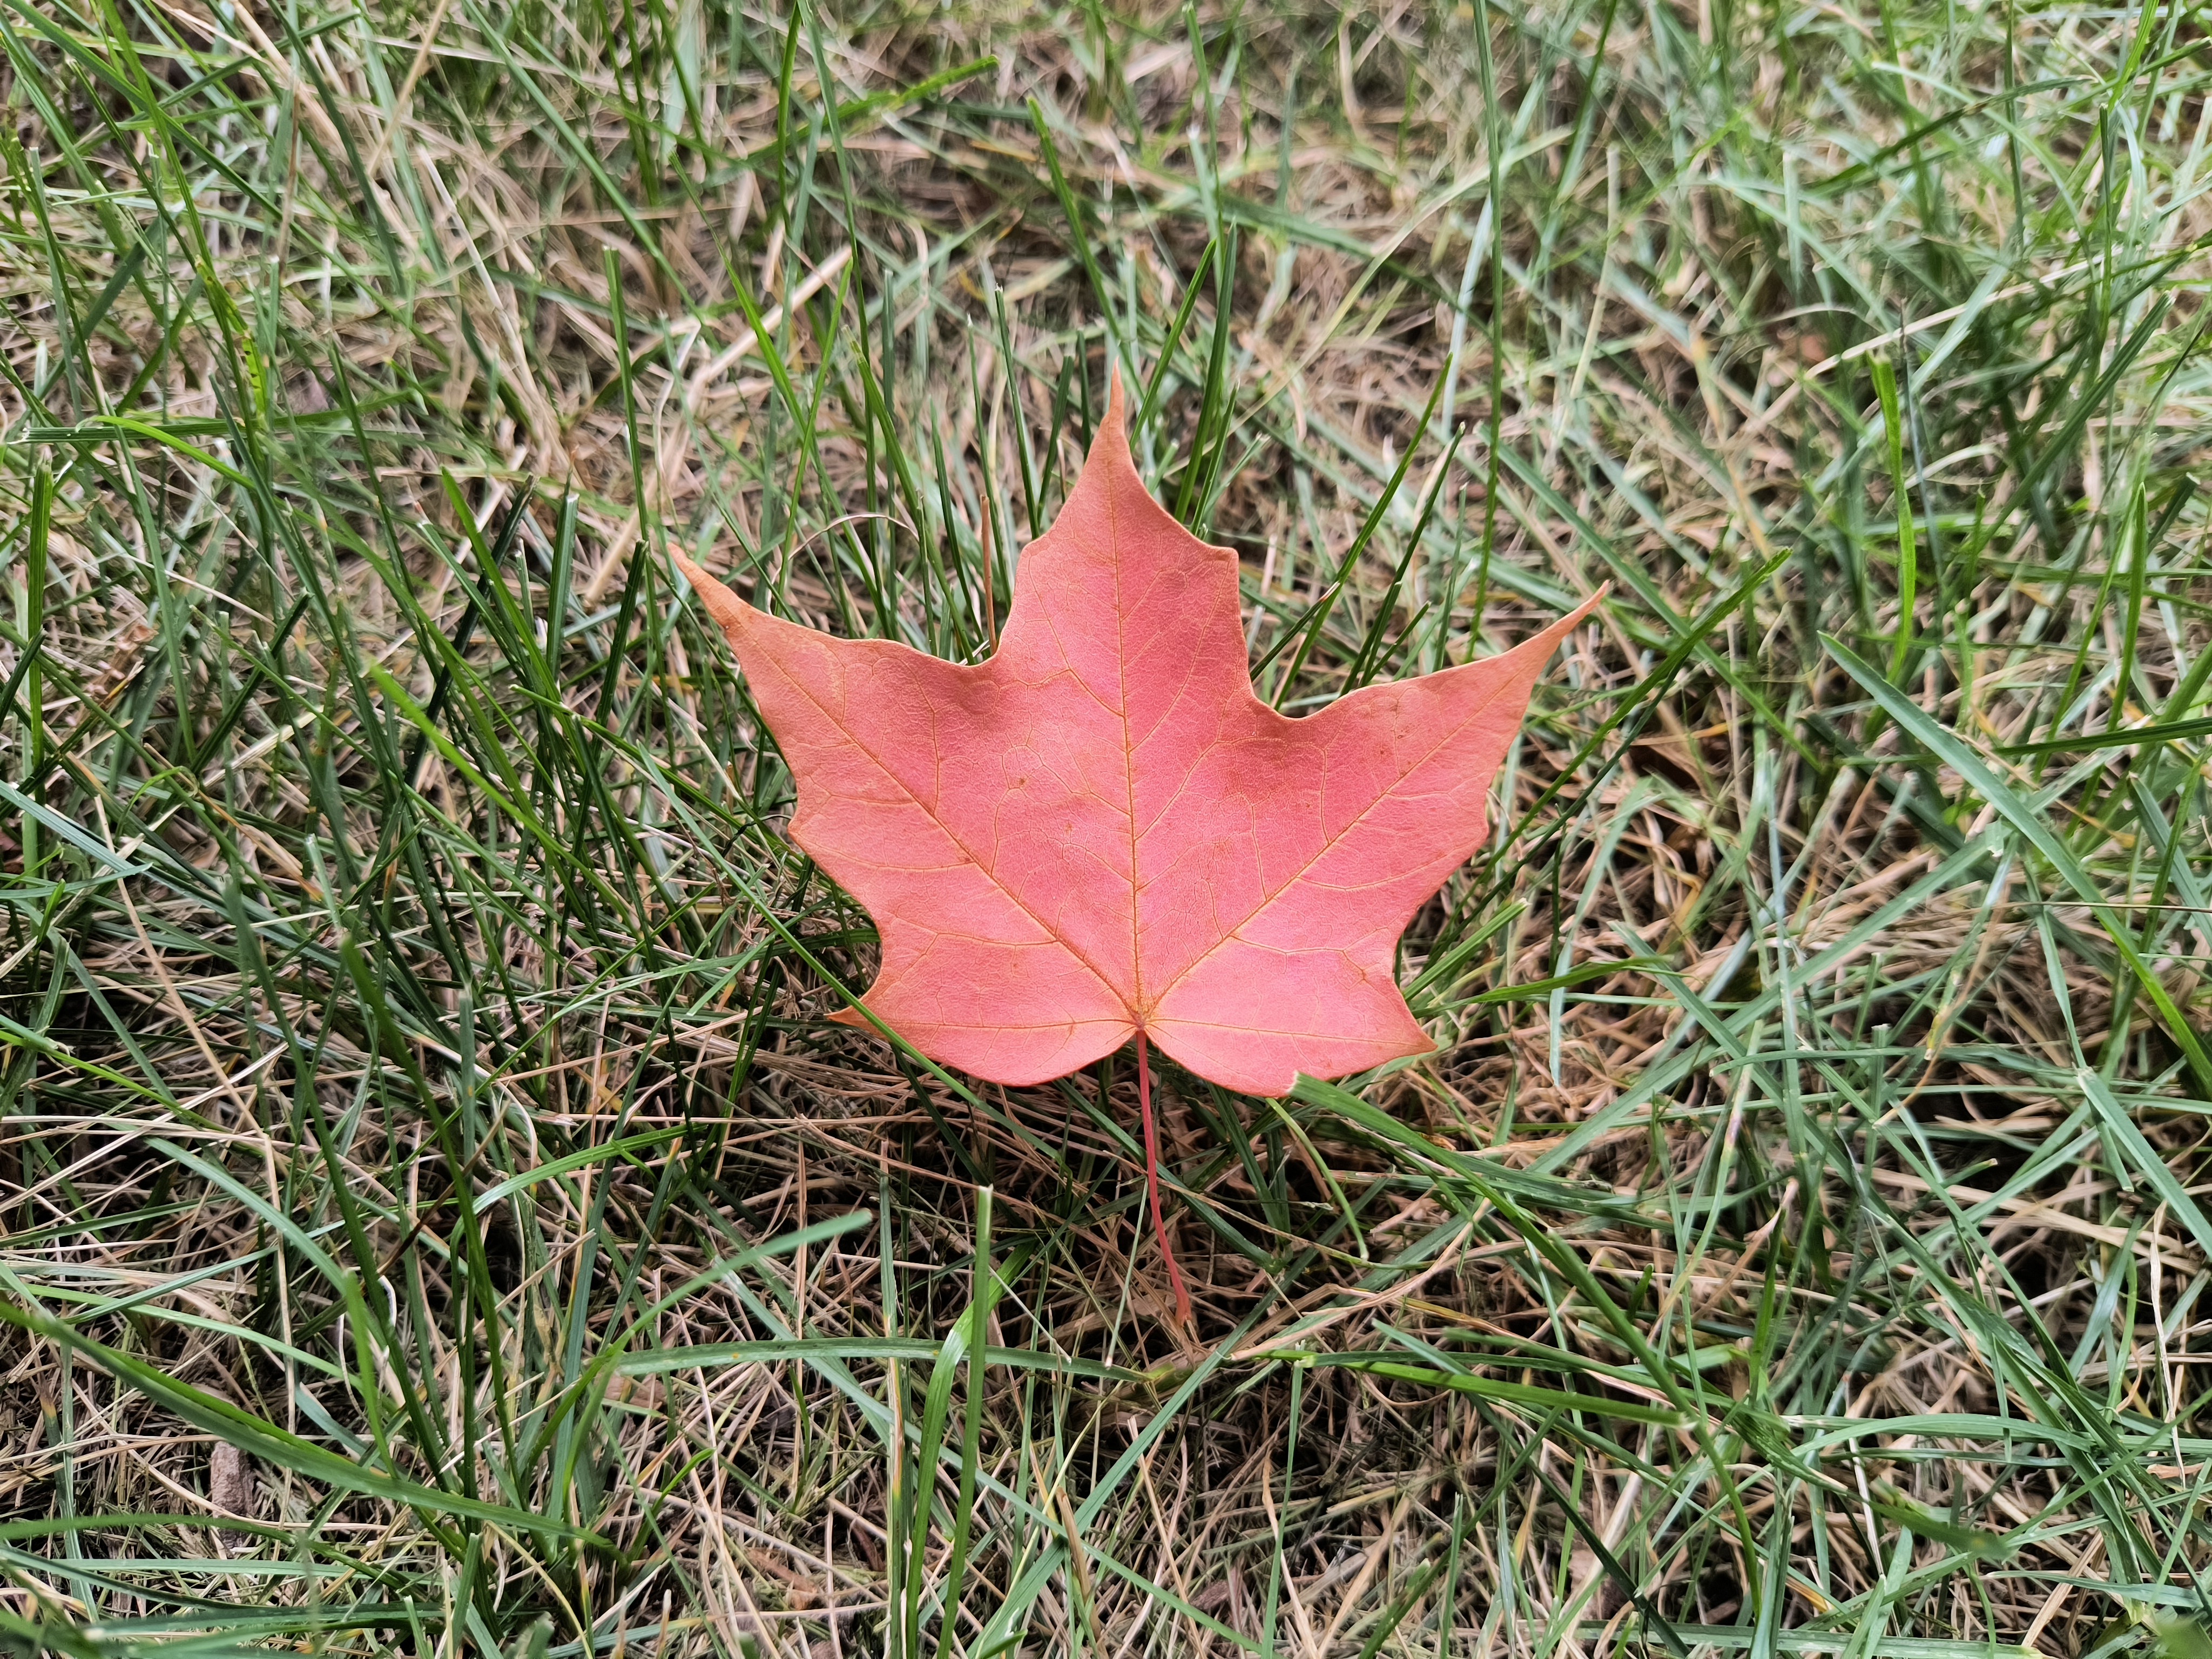 Camera sample of a red maple leaf from the Motorola Edge (2022).